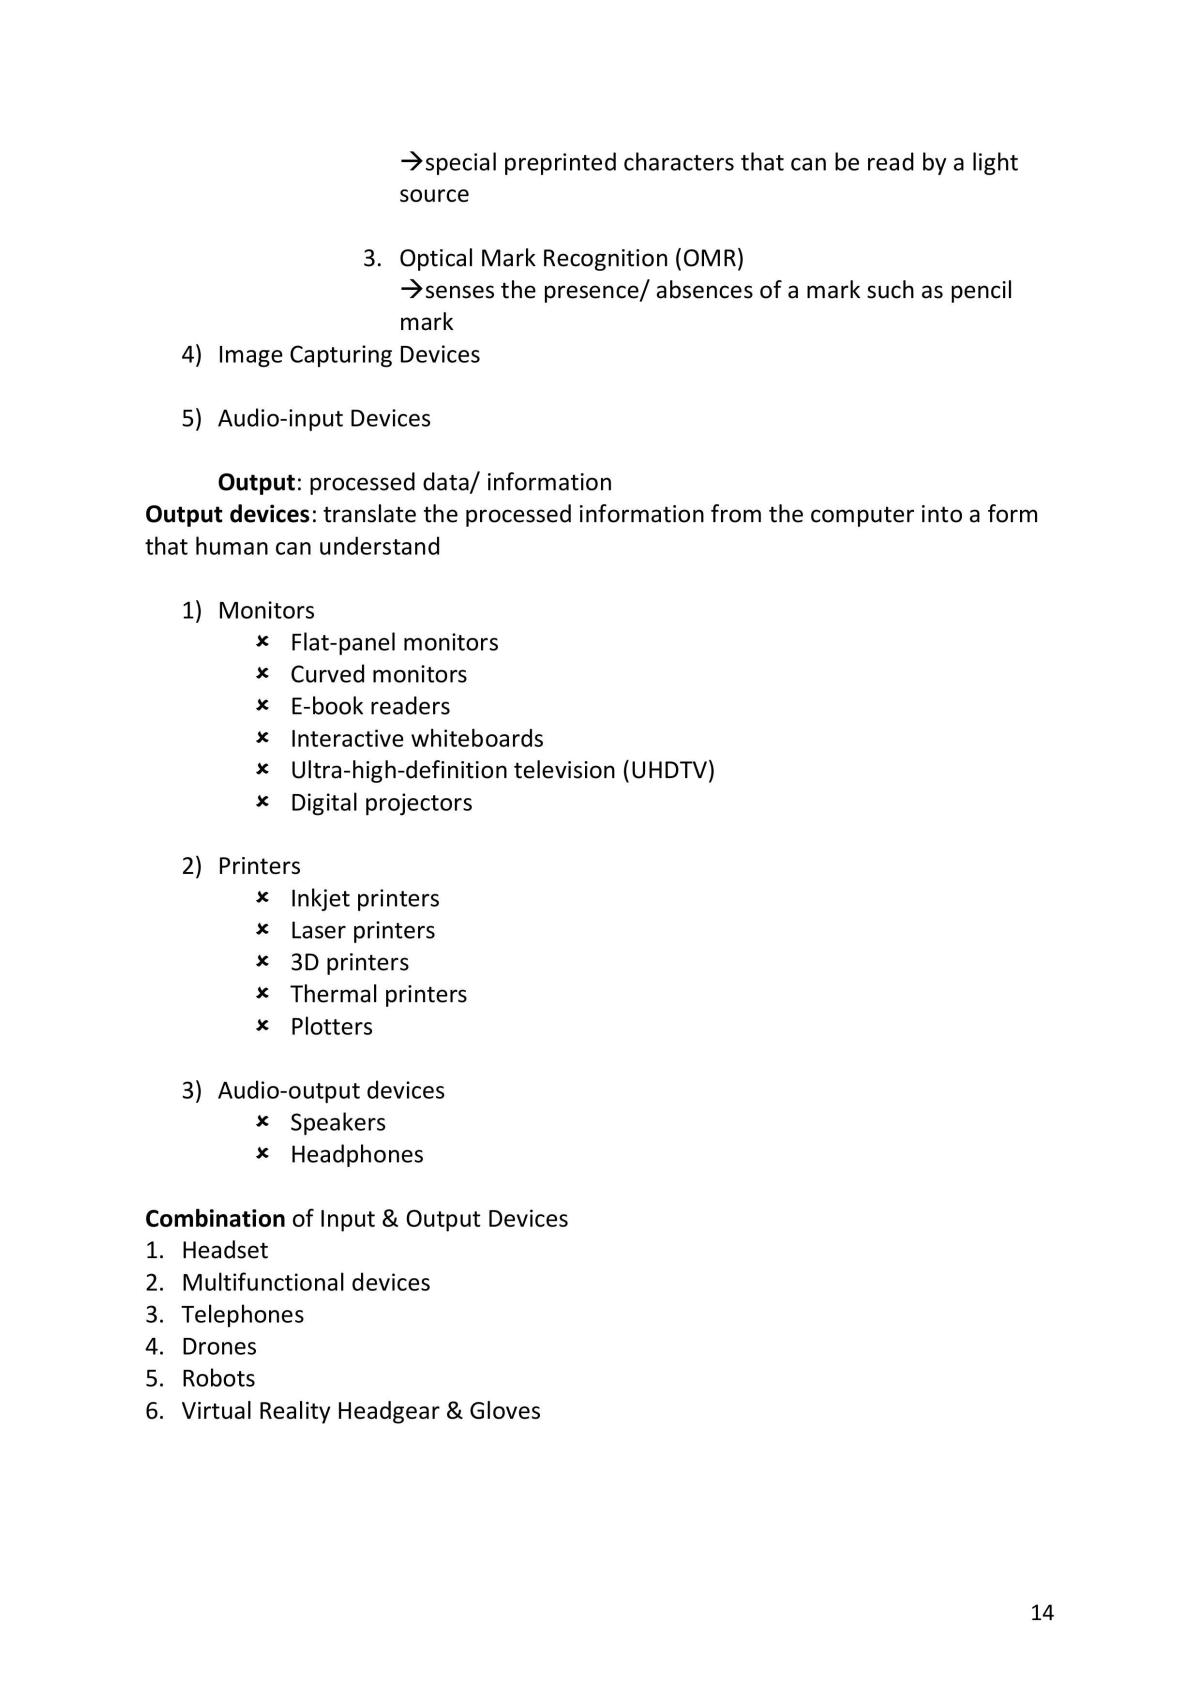 Fundamentals of ICT Notes - Page 14